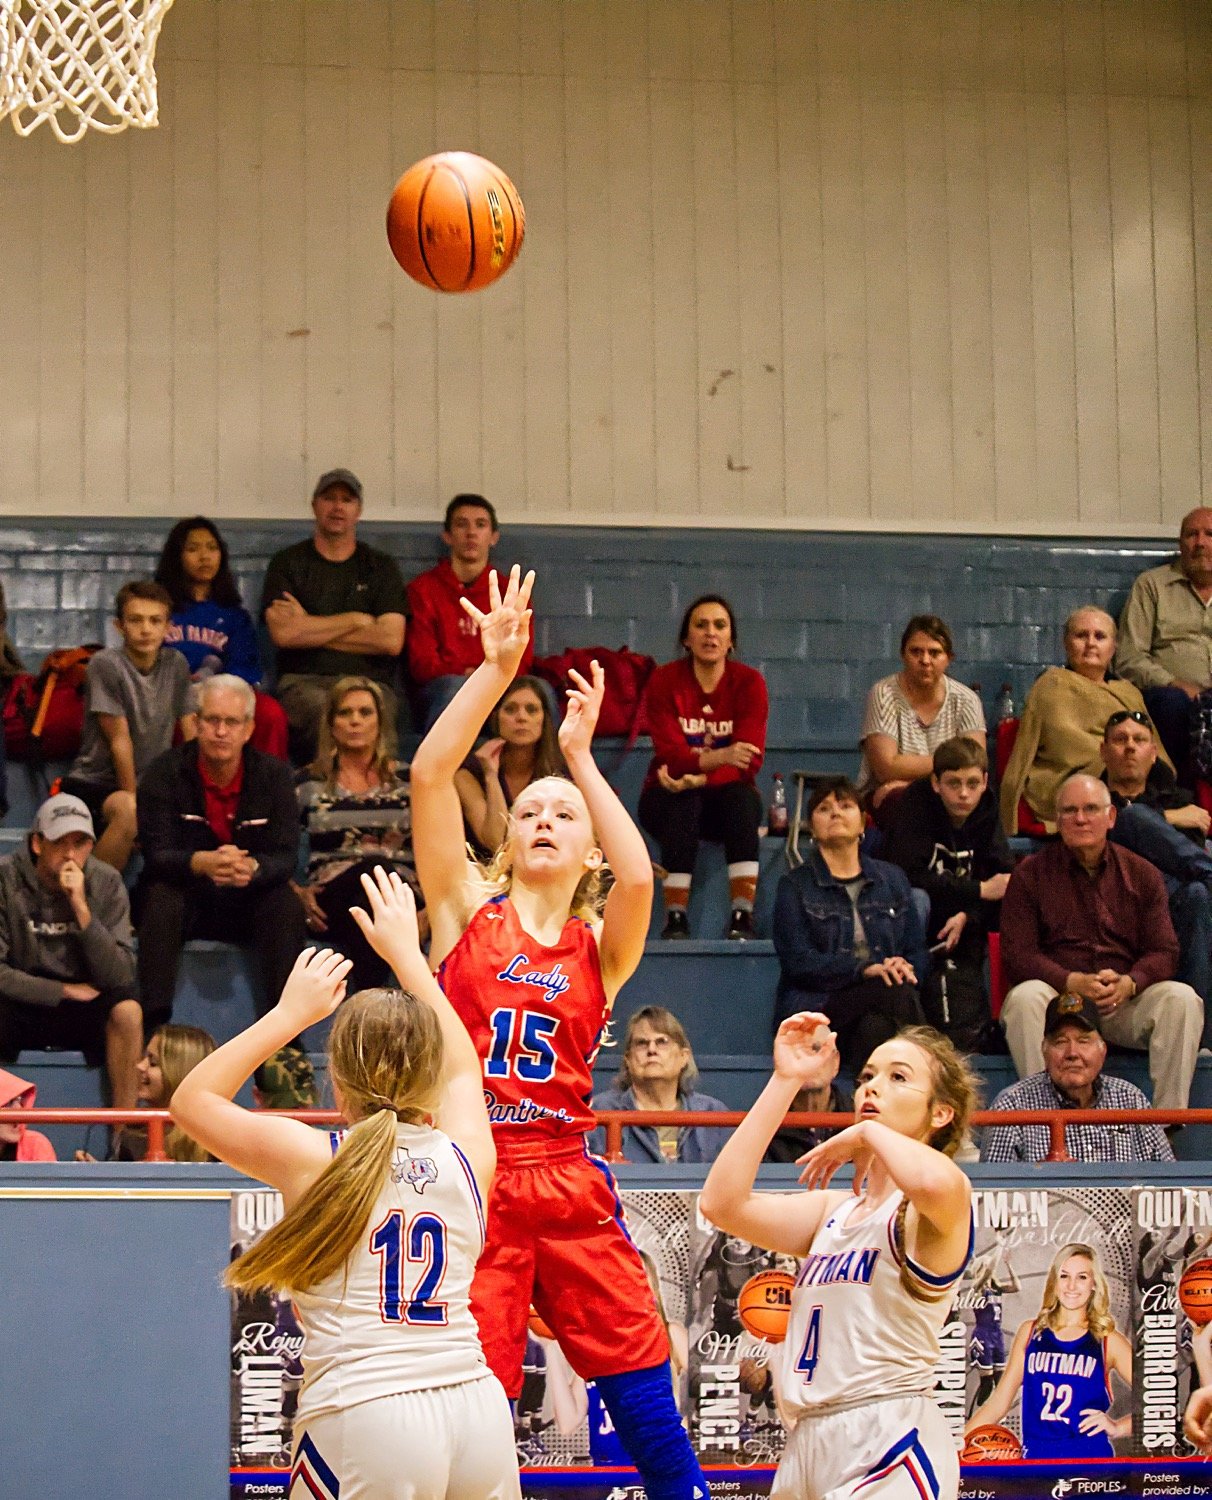 Bella Crawford (15) shoots a baseline shot for the Lady Panthers before Kynlee Love or Lindsey Hornaday can close out.